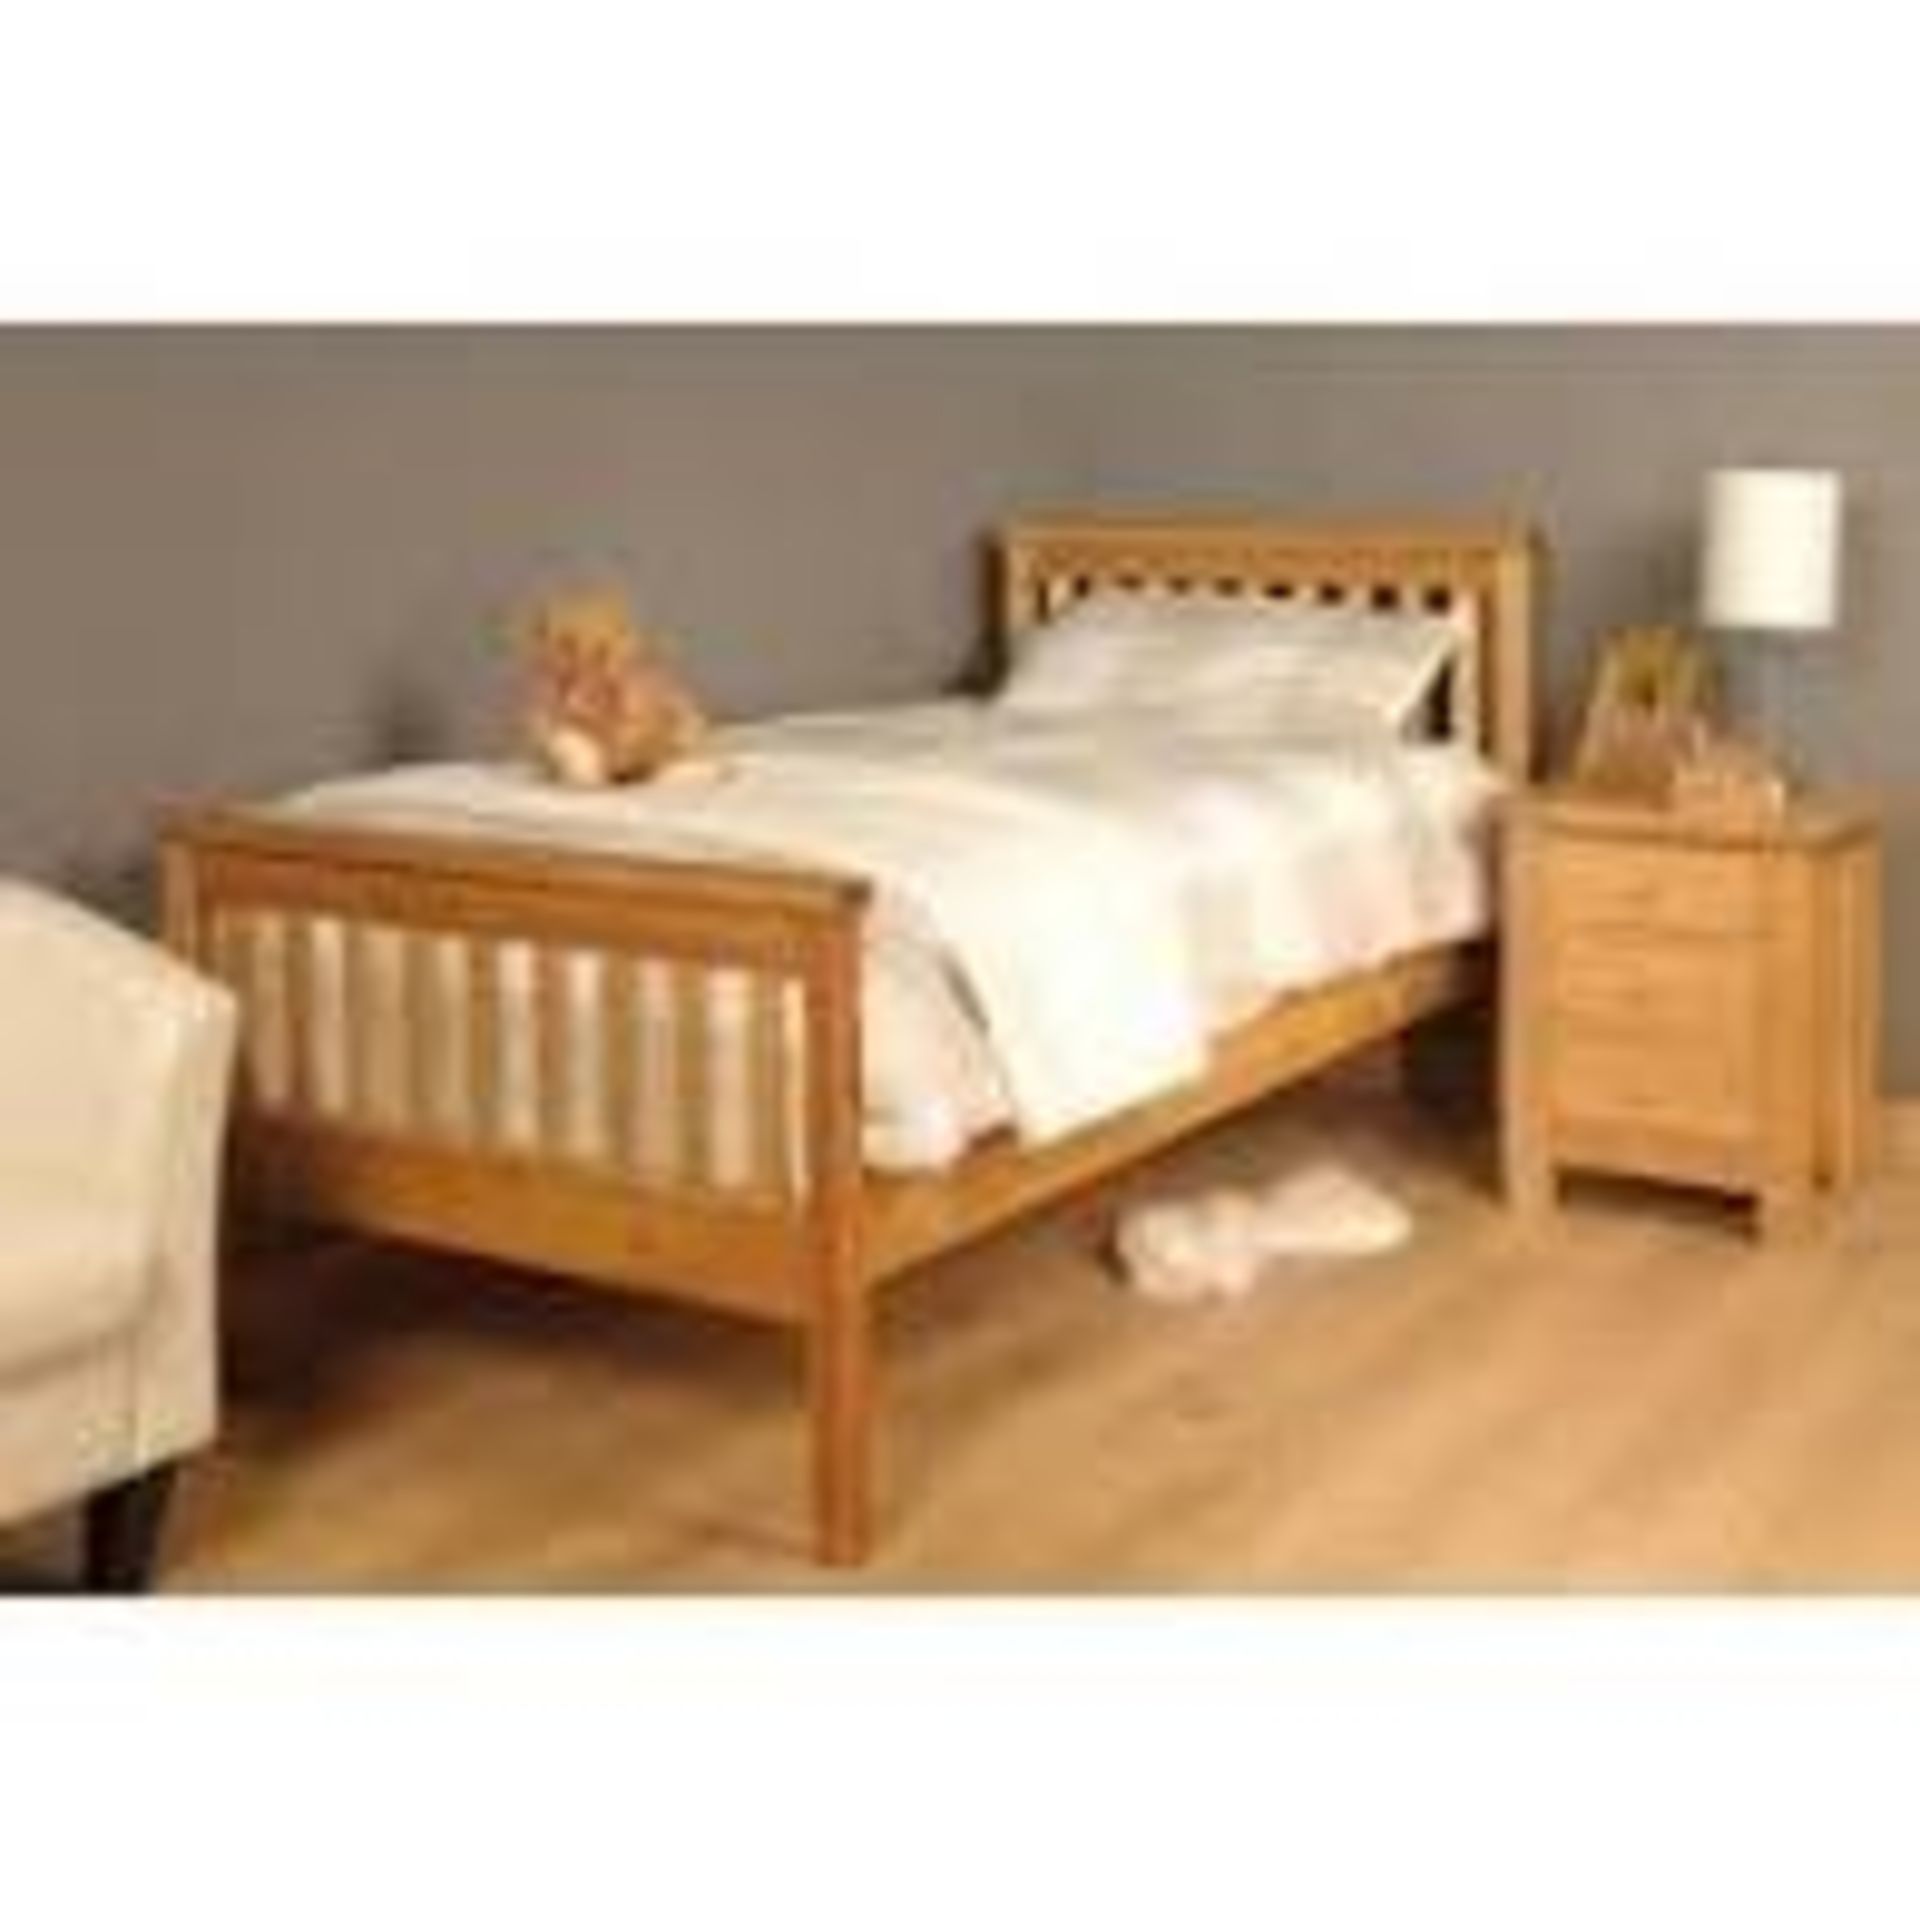 1 LOT TO CONTAIN 3 FT SINGLE WOODEN BED FROM ARK FURNITURE WITH WHITE HEADBOARD & FOOTBOARD AND GREY